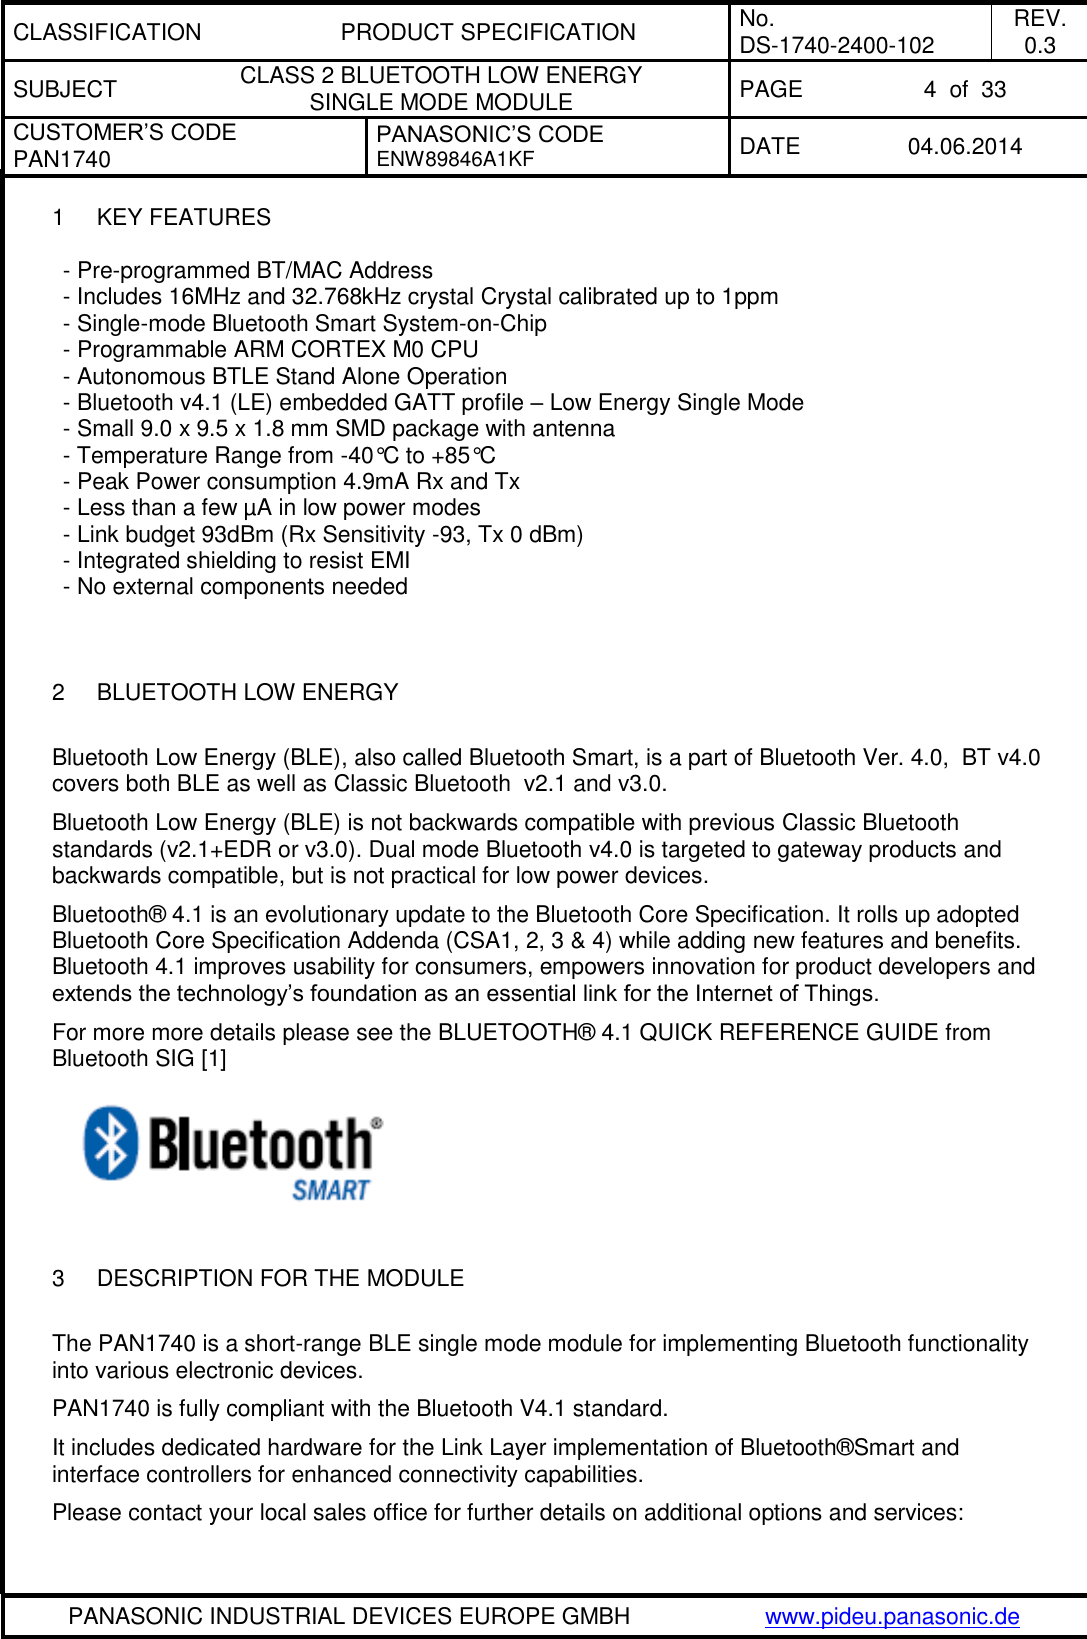 CLASSIFICATION PRODUCT SPECIFICATION No. DS-1740-2400-102 REV. 0.3 SUBJECT CLASS 2 BLUETOOTH LOW ENERGY  SINGLE MODE MODULE PAGE 4  of  33 CUSTOMER’S CODE PAN1740 PANASONIC’S CODE ENW89846A1KF DATE 04.06.2014   PANASONIC INDUSTRIAL DEVICES EUROPE GMBH www.pideu.panasonic.de  1  KEY FEATURES  - Pre-programmed BT/MAC Address - Includes 16MHz and 32.768kHz crystal Crystal calibrated up to 1ppm - Single-mode Bluetooth Smart System-on-Chip - Programmable ARM CORTEX M0 CPU - Autonomous BTLE Stand Alone Operation - Bluetooth v4.1 (LE) embedded GATT profile – Low Energy Single Mode - Small 9.0 x 9.5 x 1.8 mm SMD package with antenna - Temperature Range from -40°C to +85°C - Peak Power consumption 4.9mA Rx and Tx - Less than a few µA in low power modes - Link budget 93dBm (Rx Sensitivity -93, Tx 0 dBm) - Integrated shielding to resist EMI - No external components needed    2  BLUETOOTH LOW ENERGY  Bluetooth Low Energy (BLE), also called Bluetooth Smart, is a part of Bluetooth Ver. 4.0,  BT v4.0  covers both BLE as well as Classic Bluetooth  v2.1 and v3.0.  Bluetooth Low Energy (BLE) is not backwards compatible with previous Classic Bluetooth standards (v2.1+EDR or v3.0). Dual mode Bluetooth v4.0 is targeted to gateway products and backwards compatible, but is not practical for low power devices.  Bluetooth® 4.1 is an evolutionary update to the Bluetooth Core Specification. It rolls up adopted Bluetooth Core Specification Addenda (CSA1, 2, 3 &amp; 4) while adding new features and benefits. Bluetooth 4.1 improves usability for consumers, empowers innovation for product developers and extends the technology’s foundation as an essential link for the Internet of Things. For more more details please see the BLUETOOTH® 4.1 QUICK REFERENCE GUIDE from Bluetooth SIG [1]    3  DESCRIPTION FOR THE MODULE  The PAN1740 is a short-range BLE single mode module for implementing Bluetooth functionality into various electronic devices. PAN1740 is fully compliant with the Bluetooth V4.1 standard. It includes dedicated hardware for the Link Layer implementation of Bluetooth®Smart and interface controllers for enhanced connectivity capabilities. Please contact your local sales office for further details on additional options and services: 